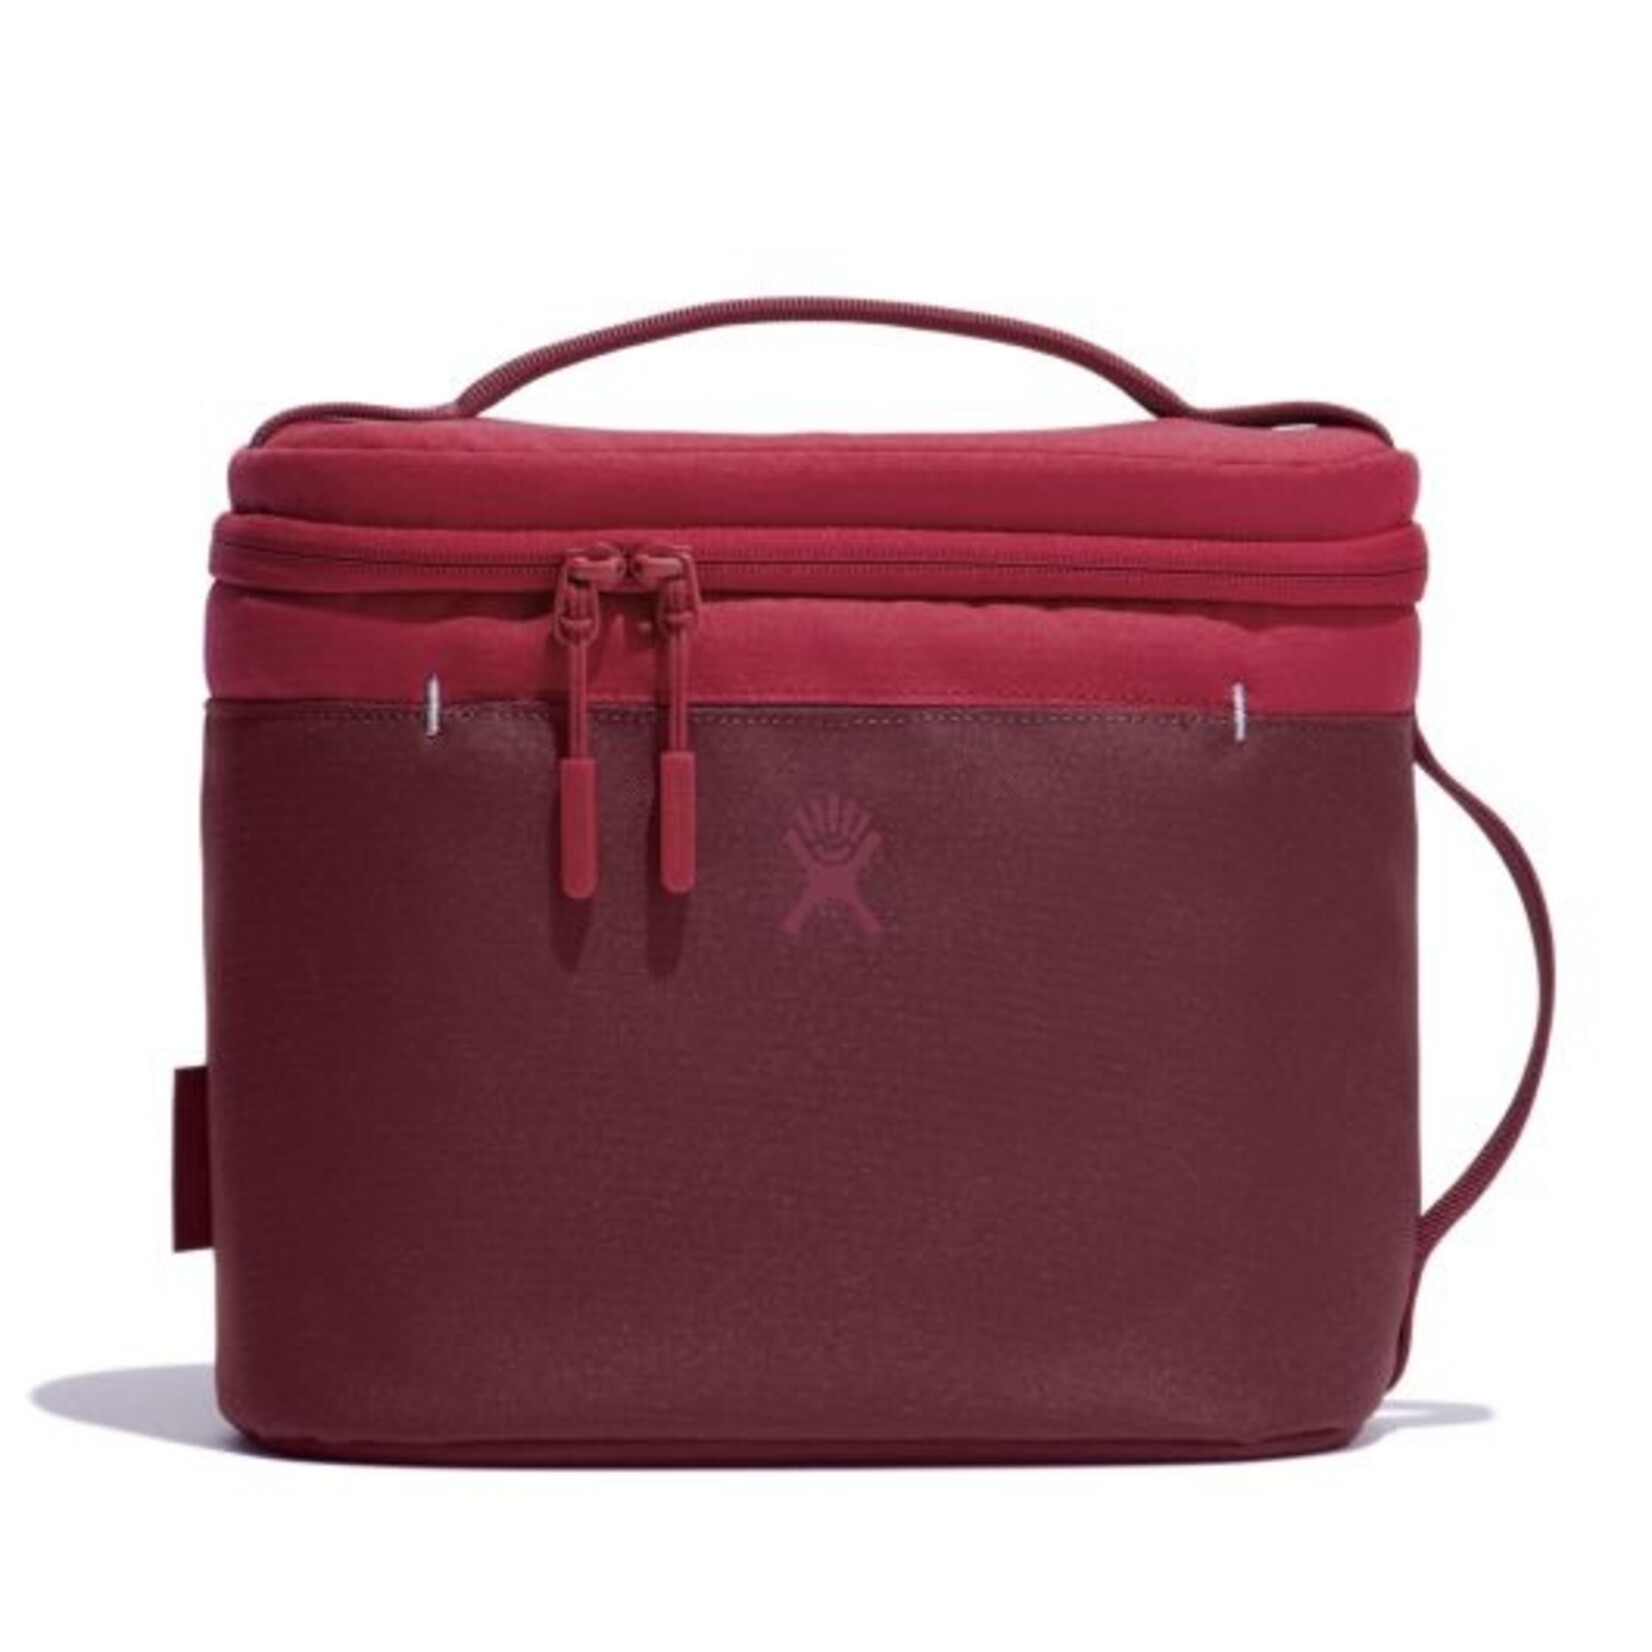 Insulated Lunch Bag-lunch Bag For Women